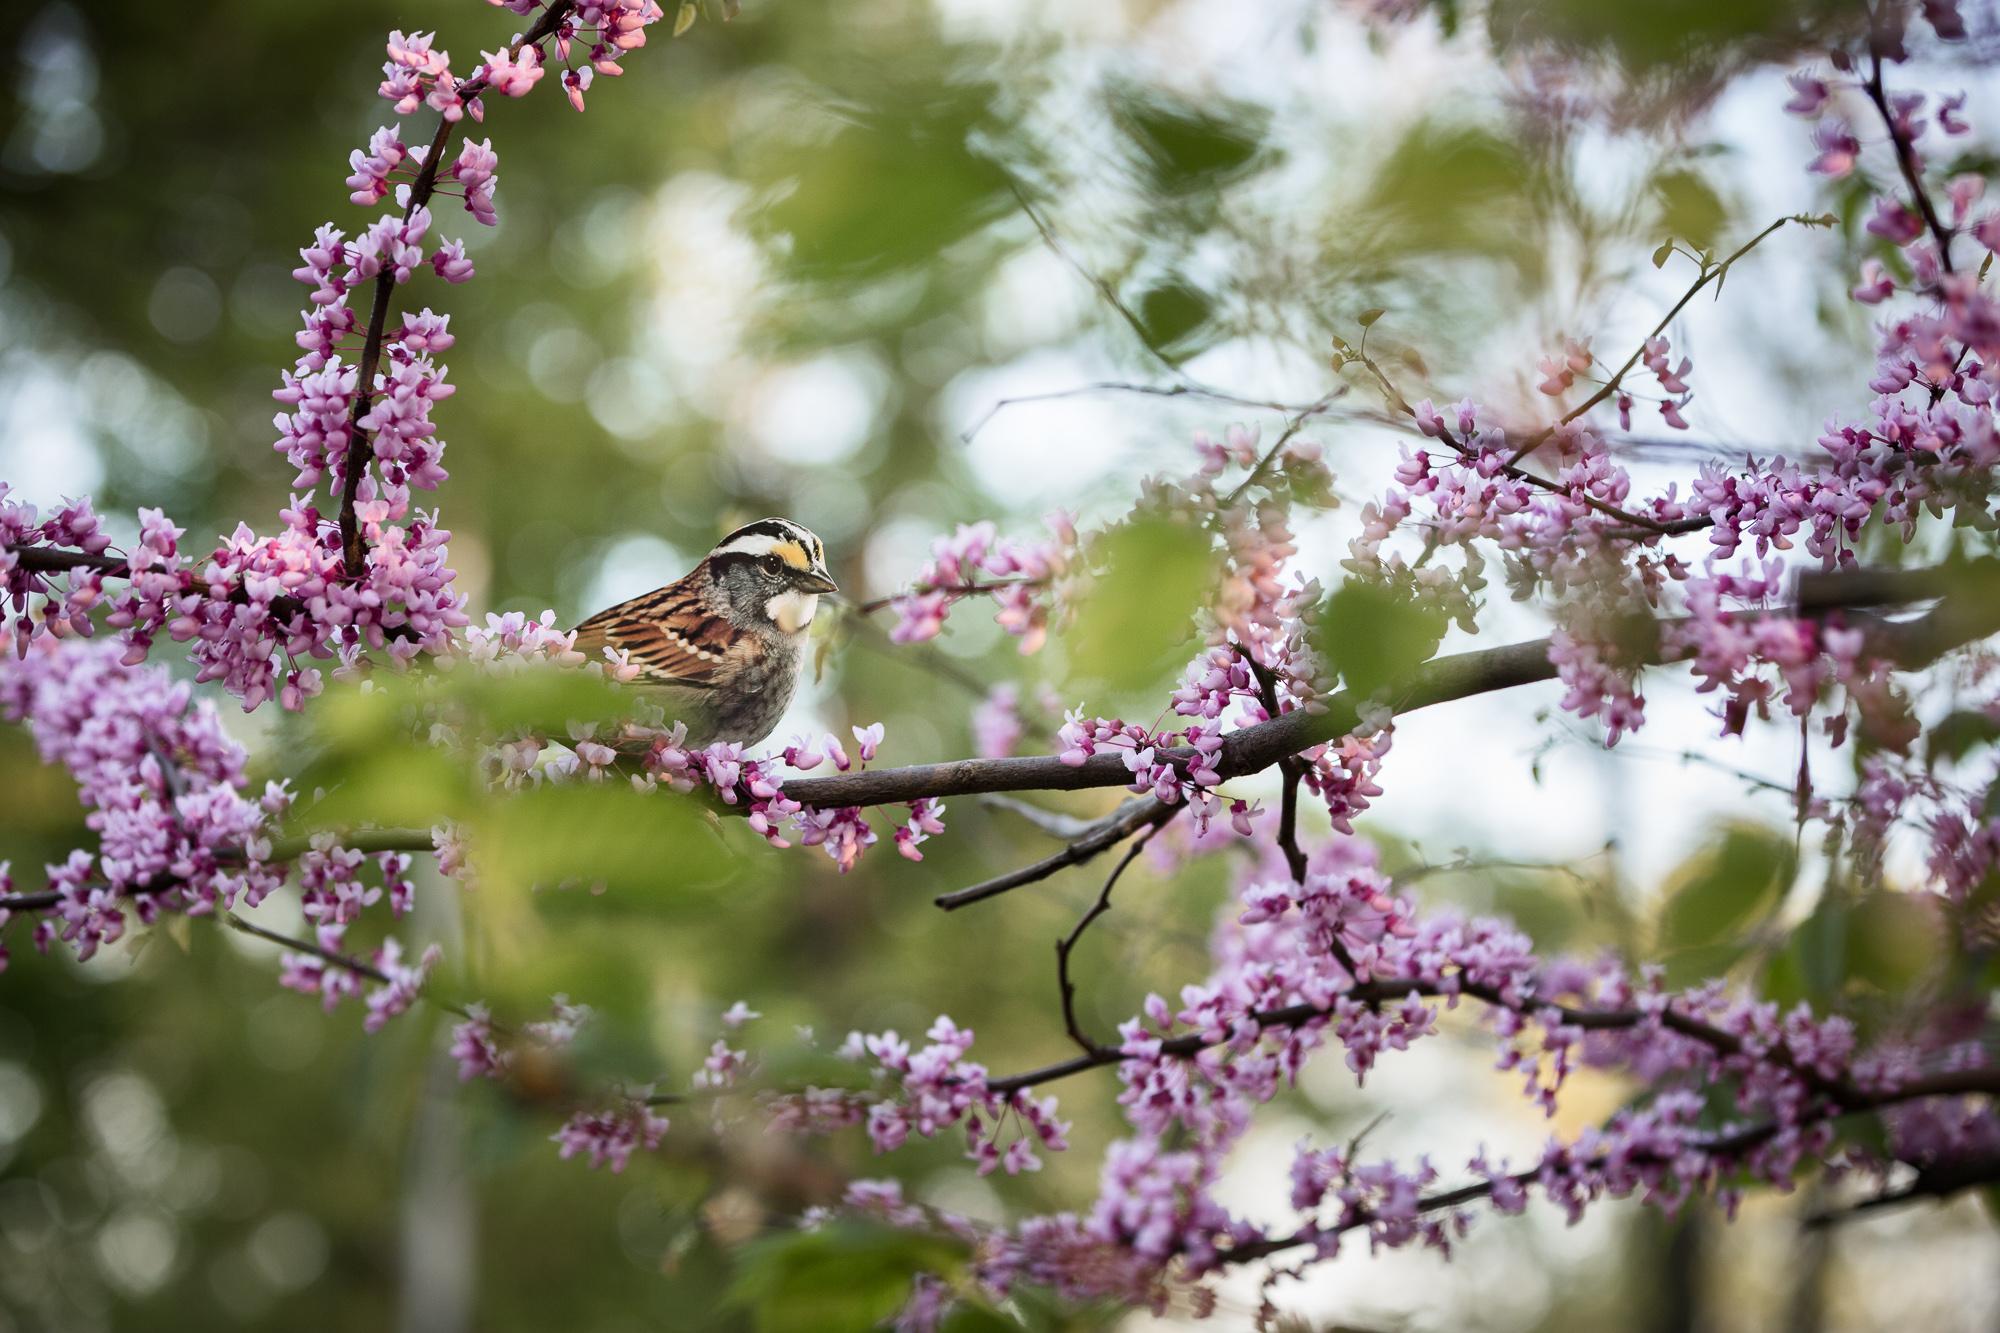 Carolyn Monastra Landscape Photograph - "White-throated Sparrow"